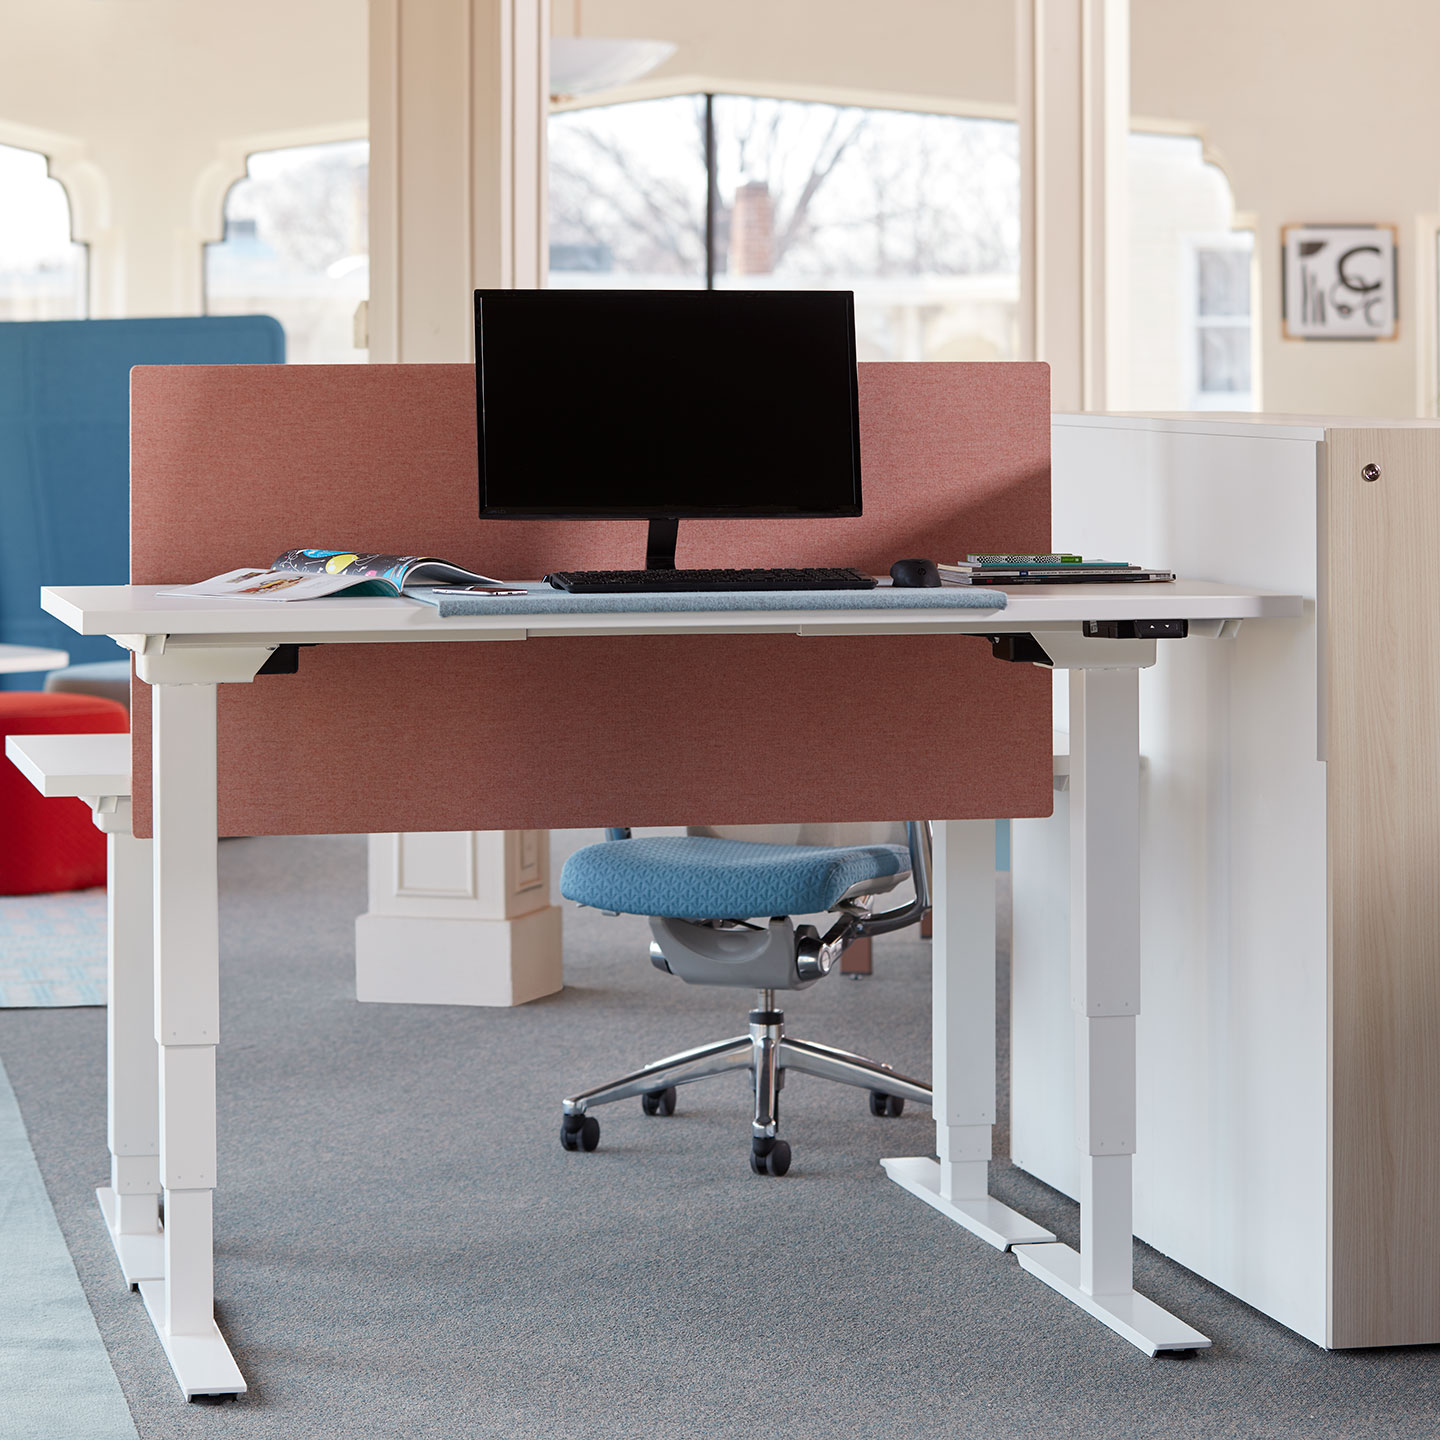 Haworth Hop Height Adjustable Table in a open office space